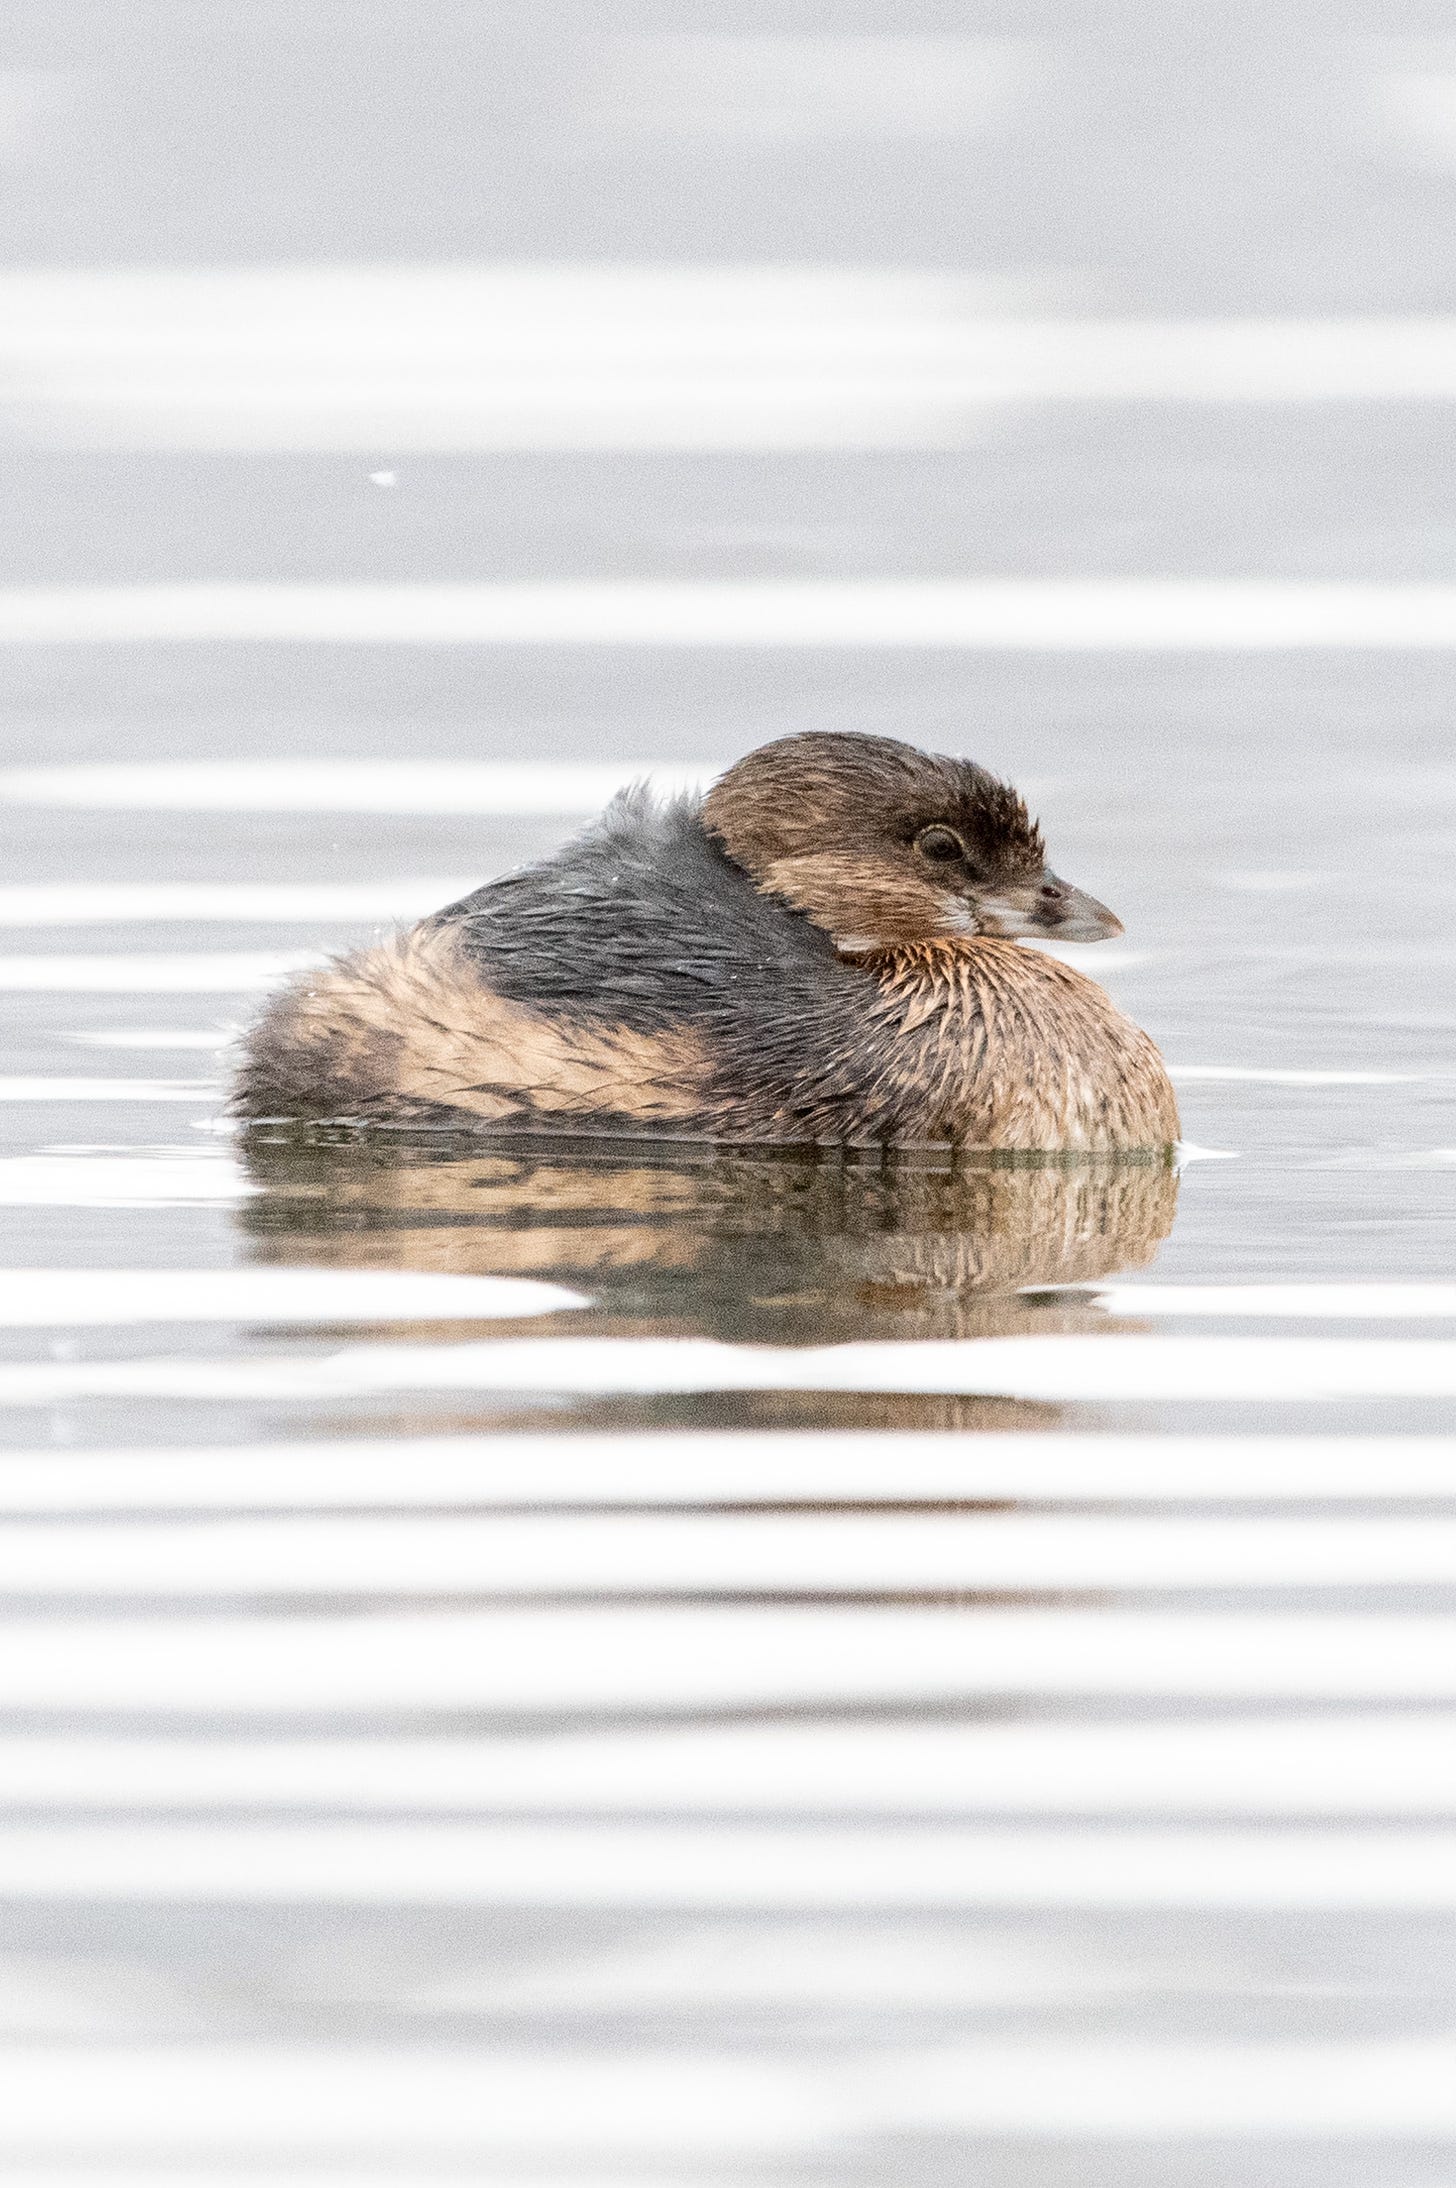 A brown bird with a hash-mark over its bill, its feathers fluffed up against the cold, floats on water